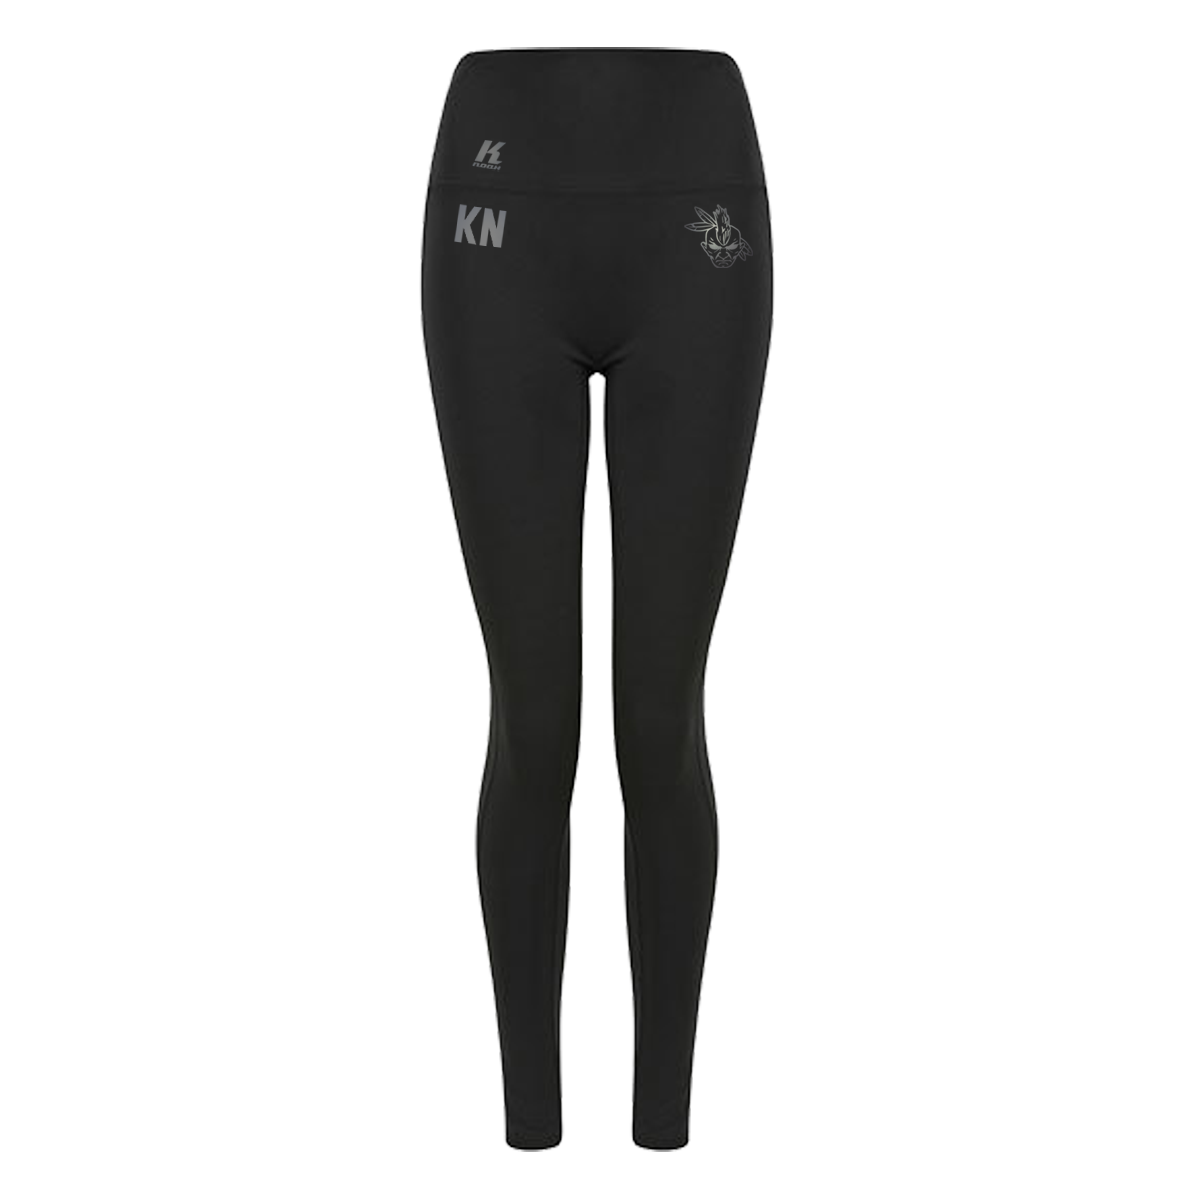 Warriors "Blackline" Womens Core Pocket Legging TL370 with Initials/Playernumber